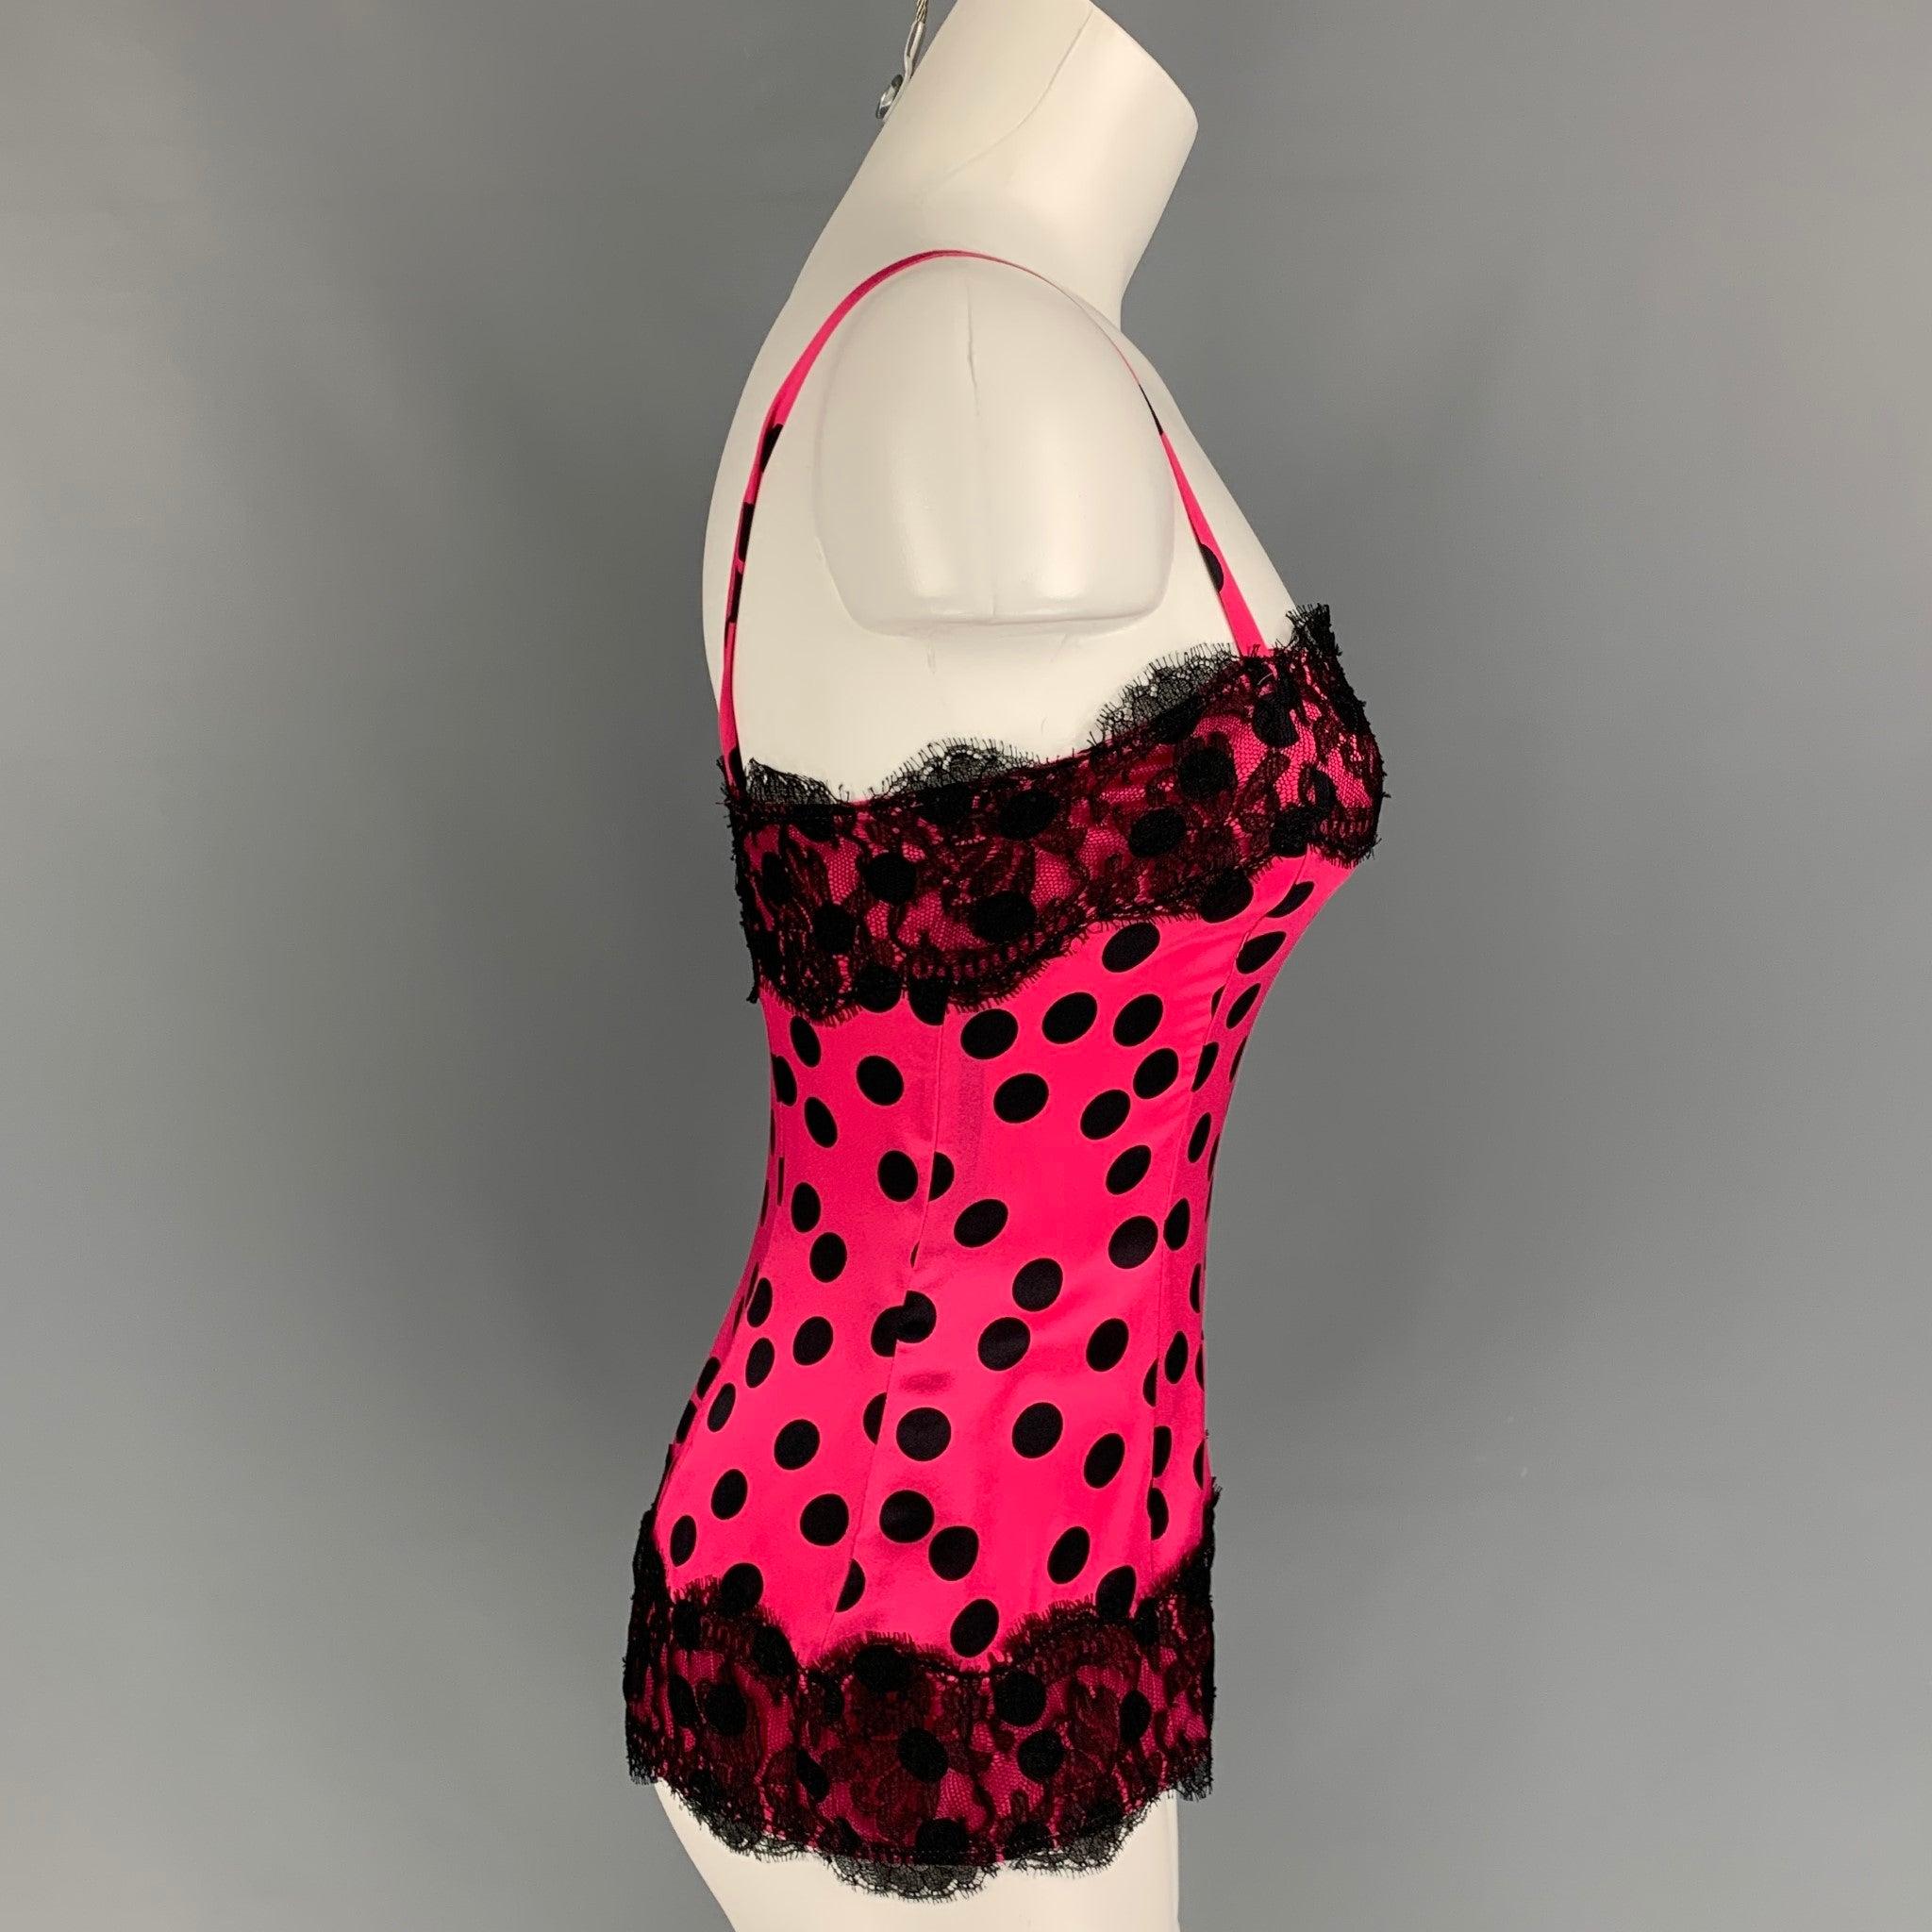 D&G by DOLCE & GABBANA casual top comes in a pink & black polka dot silk featuring a lace trim design, spaghetti straps, and a back zip up closure.
Excellent
Pre-Owned Condition. 

Marked:   38 

Measurements: 
  Bust: 29 inches  Length: 14 inches